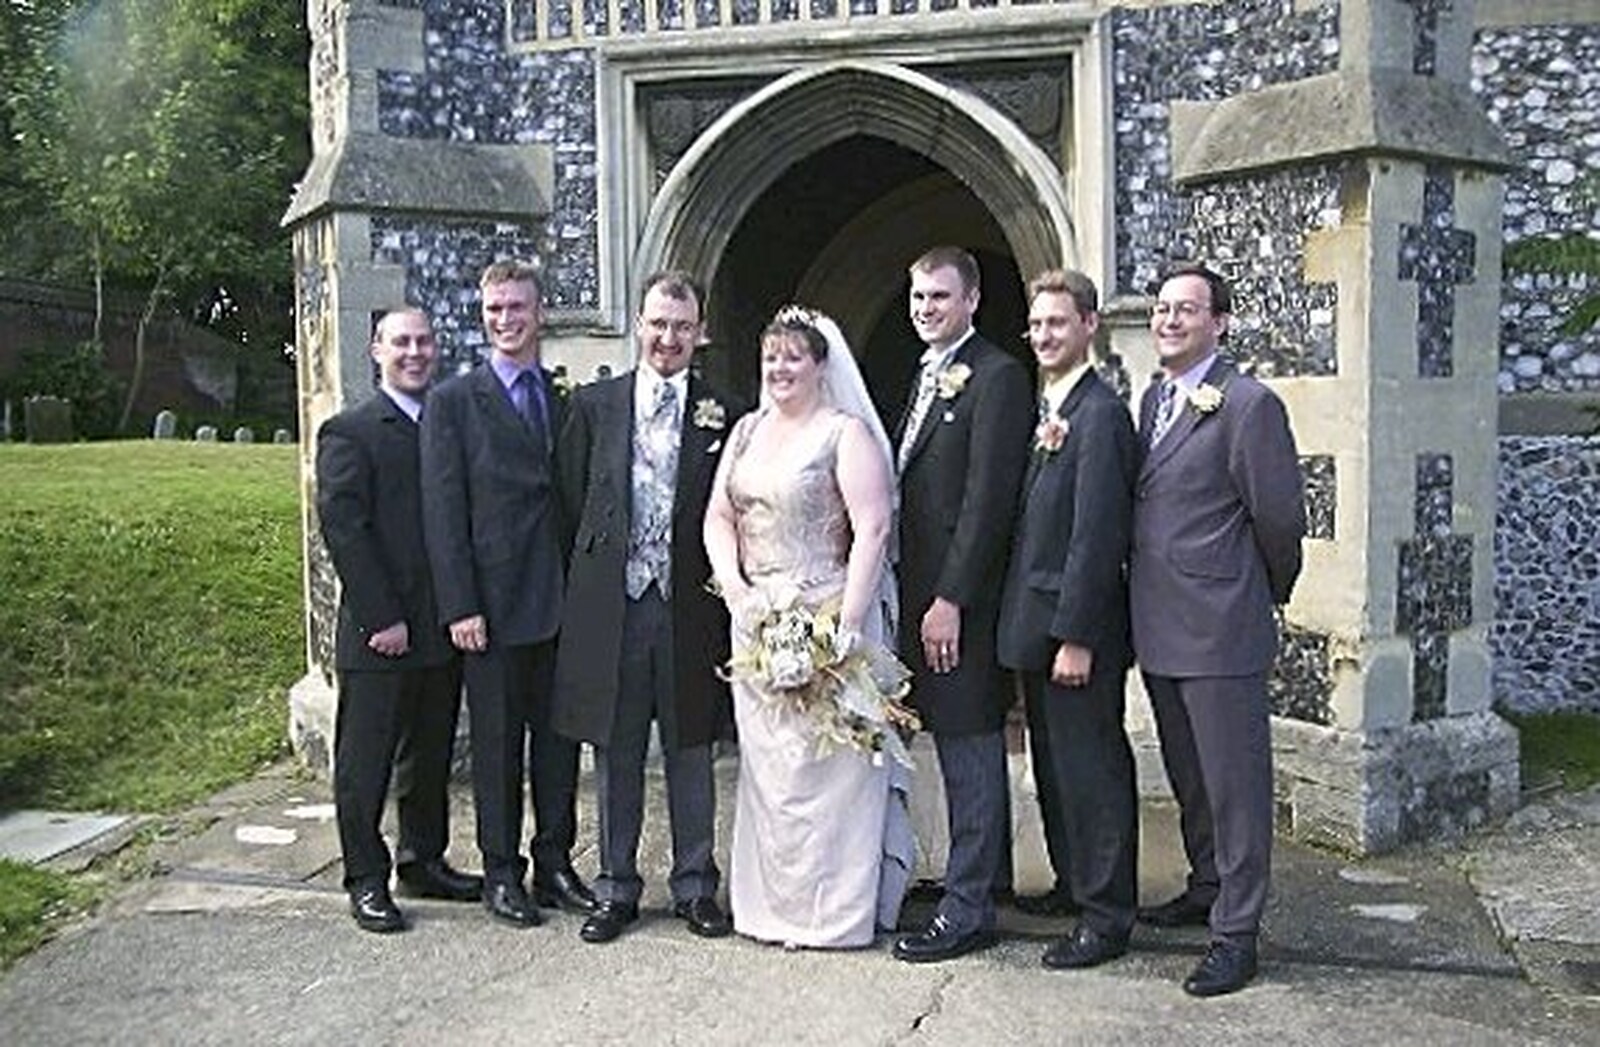 The wedding men from Phil and Lisa's Wedding, Woolverston Hall, Ipswich, Suffolk - 1st July 2001